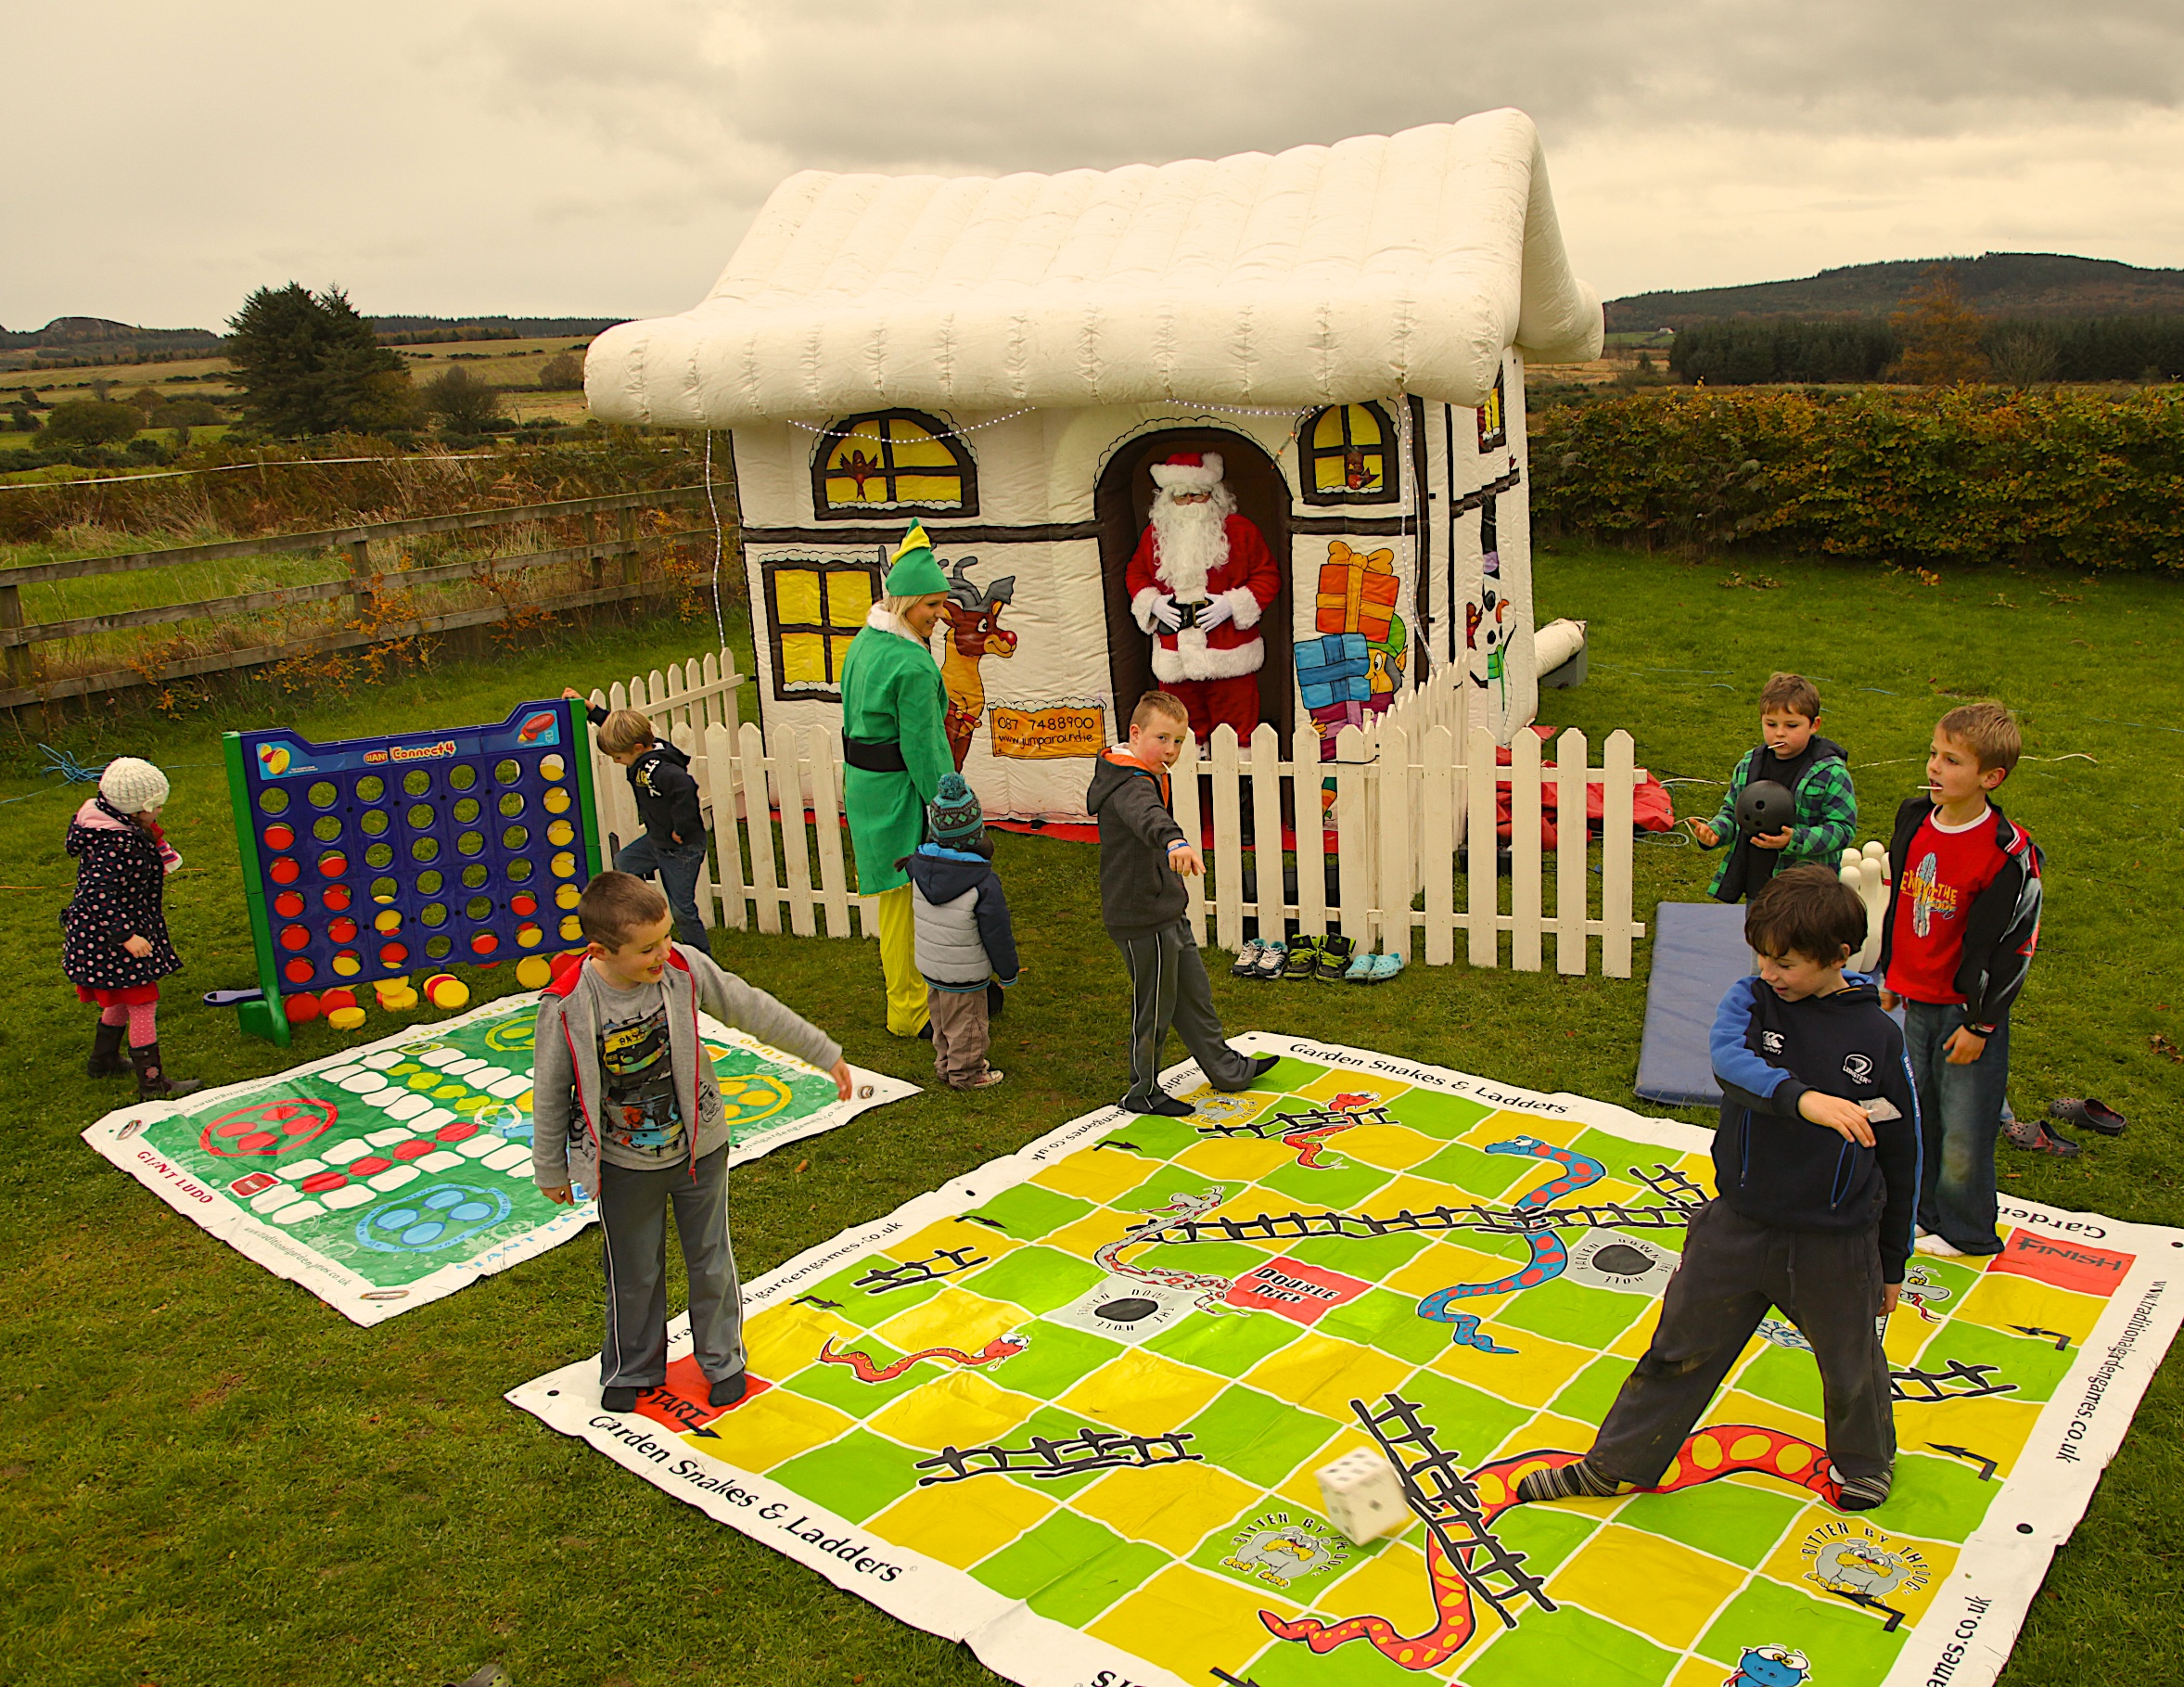 Combine Any Inflatable With Some Games & You Have A Big Party!